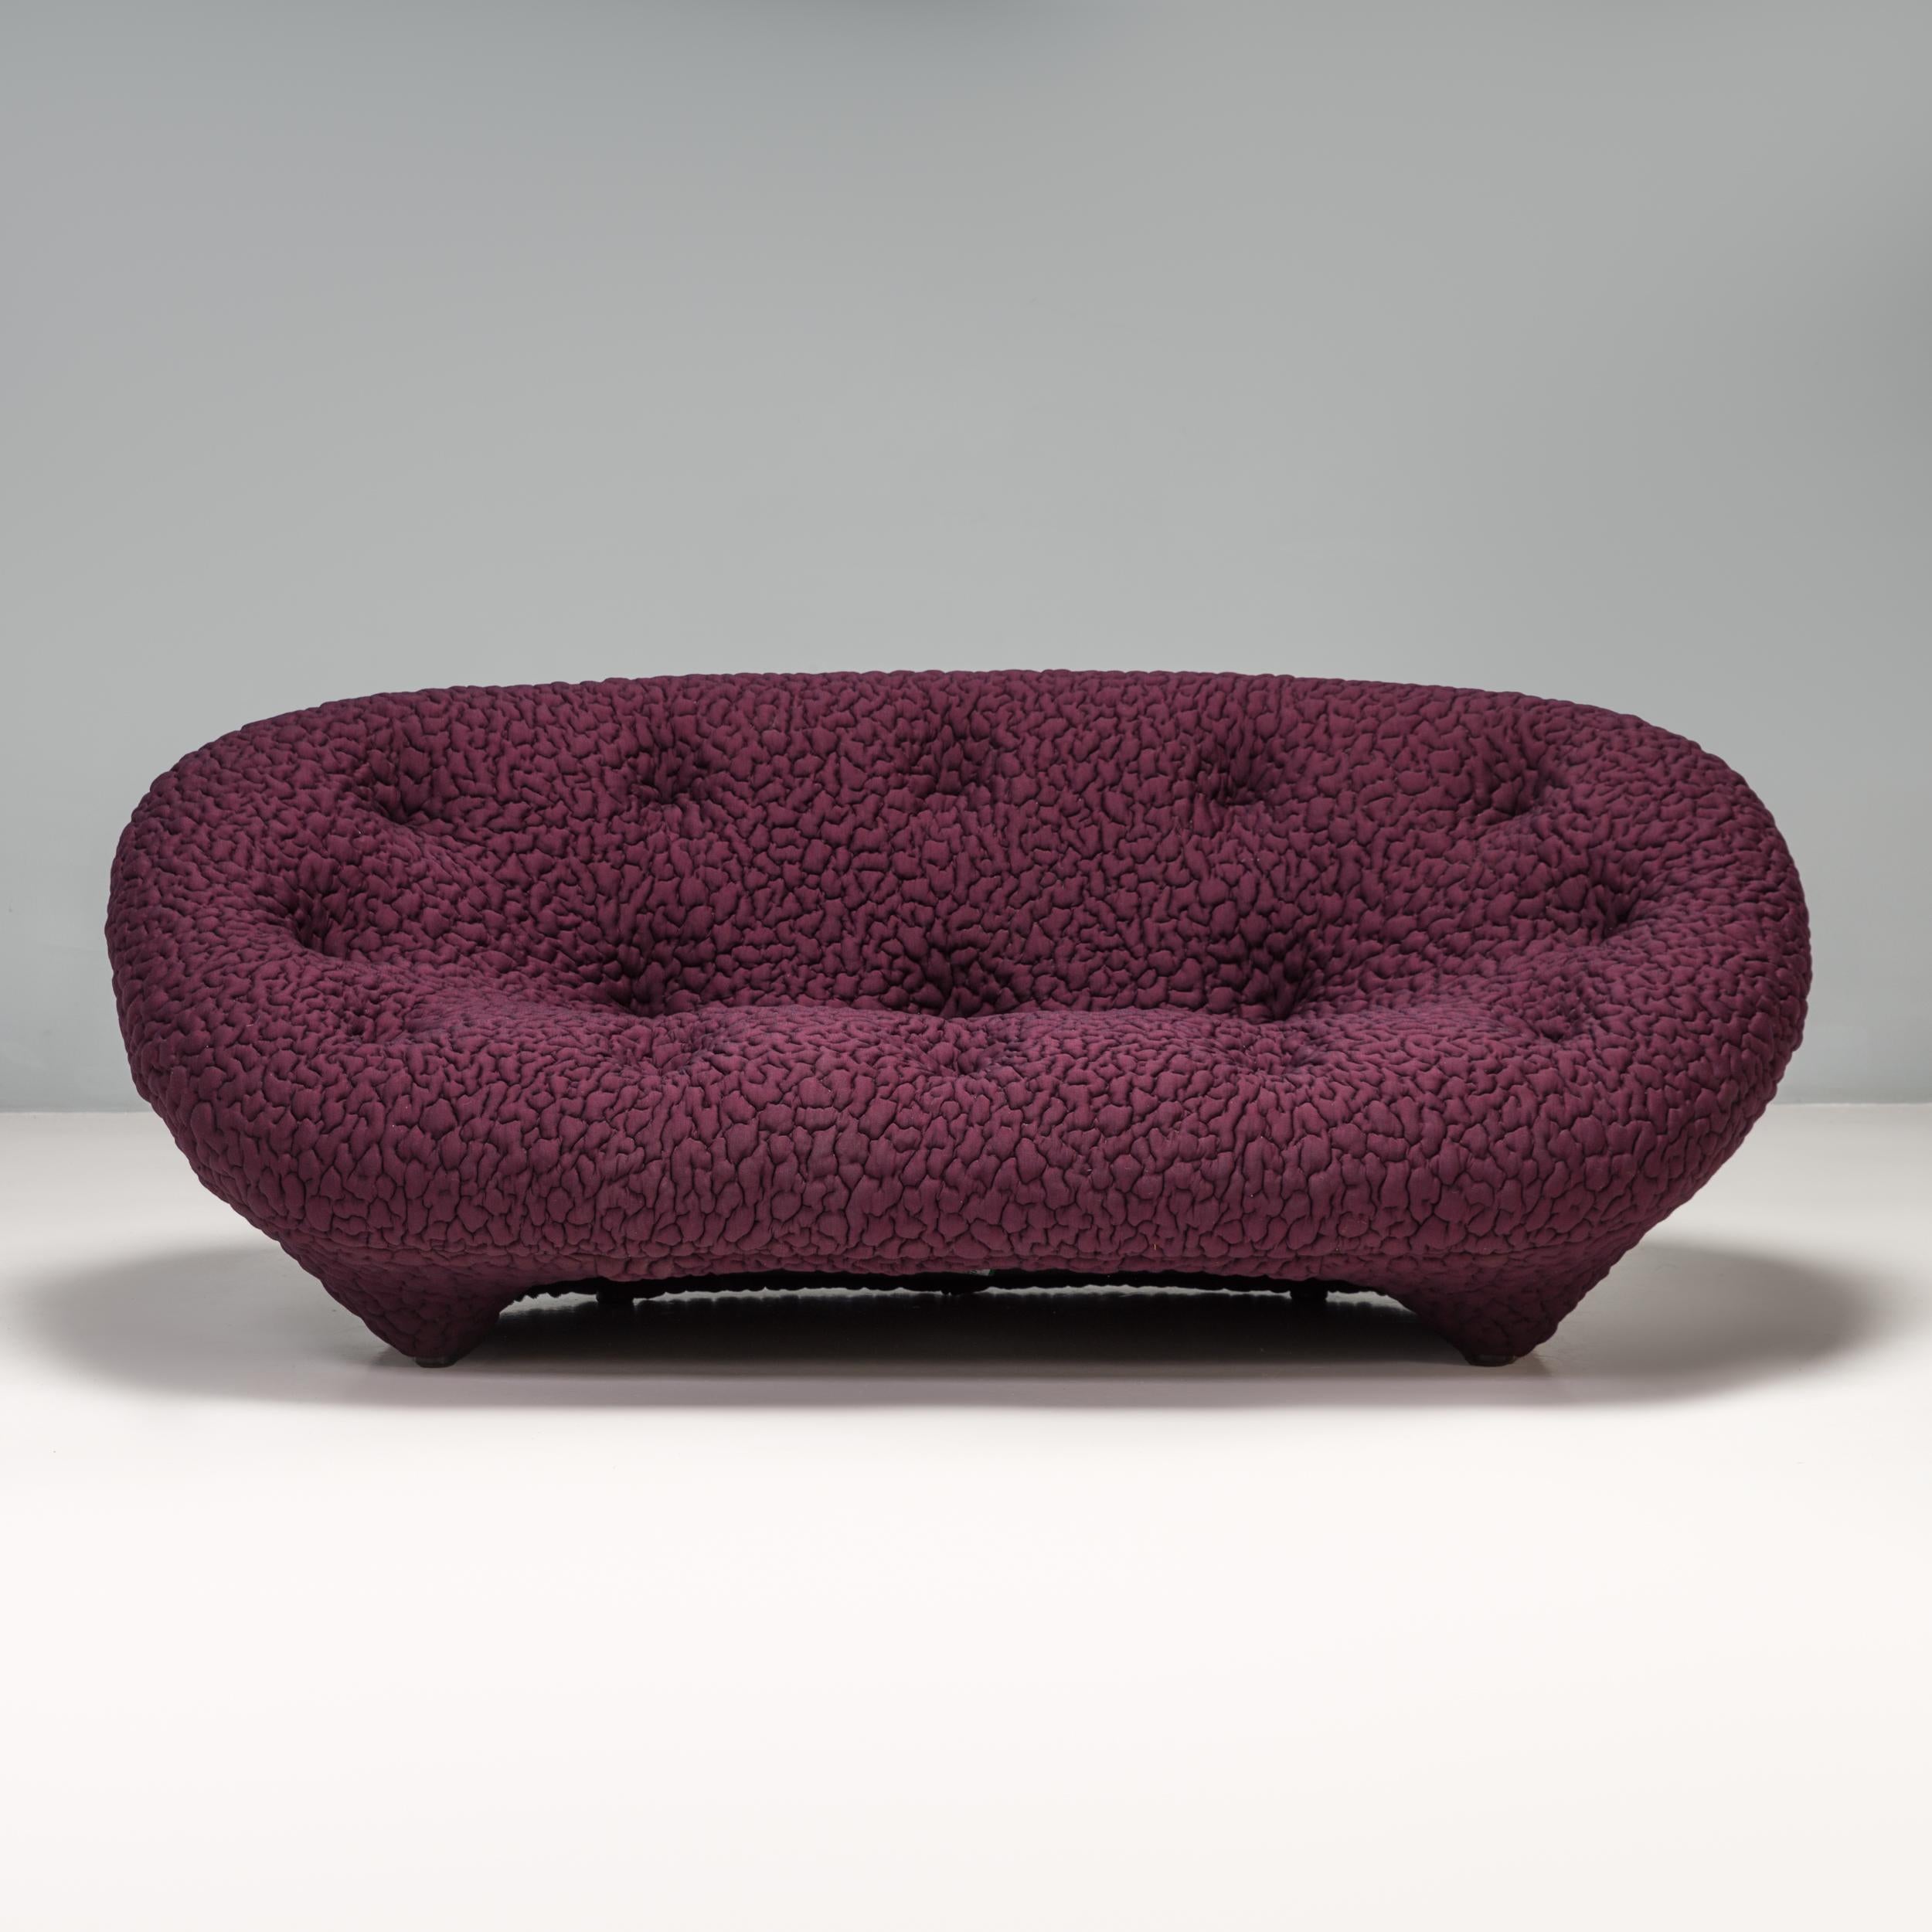 Originally designed by Erwan and Ronan Bouroullec for Ligne Roset in 2011, the Pluom sofa is a fantastic example of modern design.

The organic shape is formed from tubular steel and wire mesh with layers of foam to ensure the ultimate comfort,